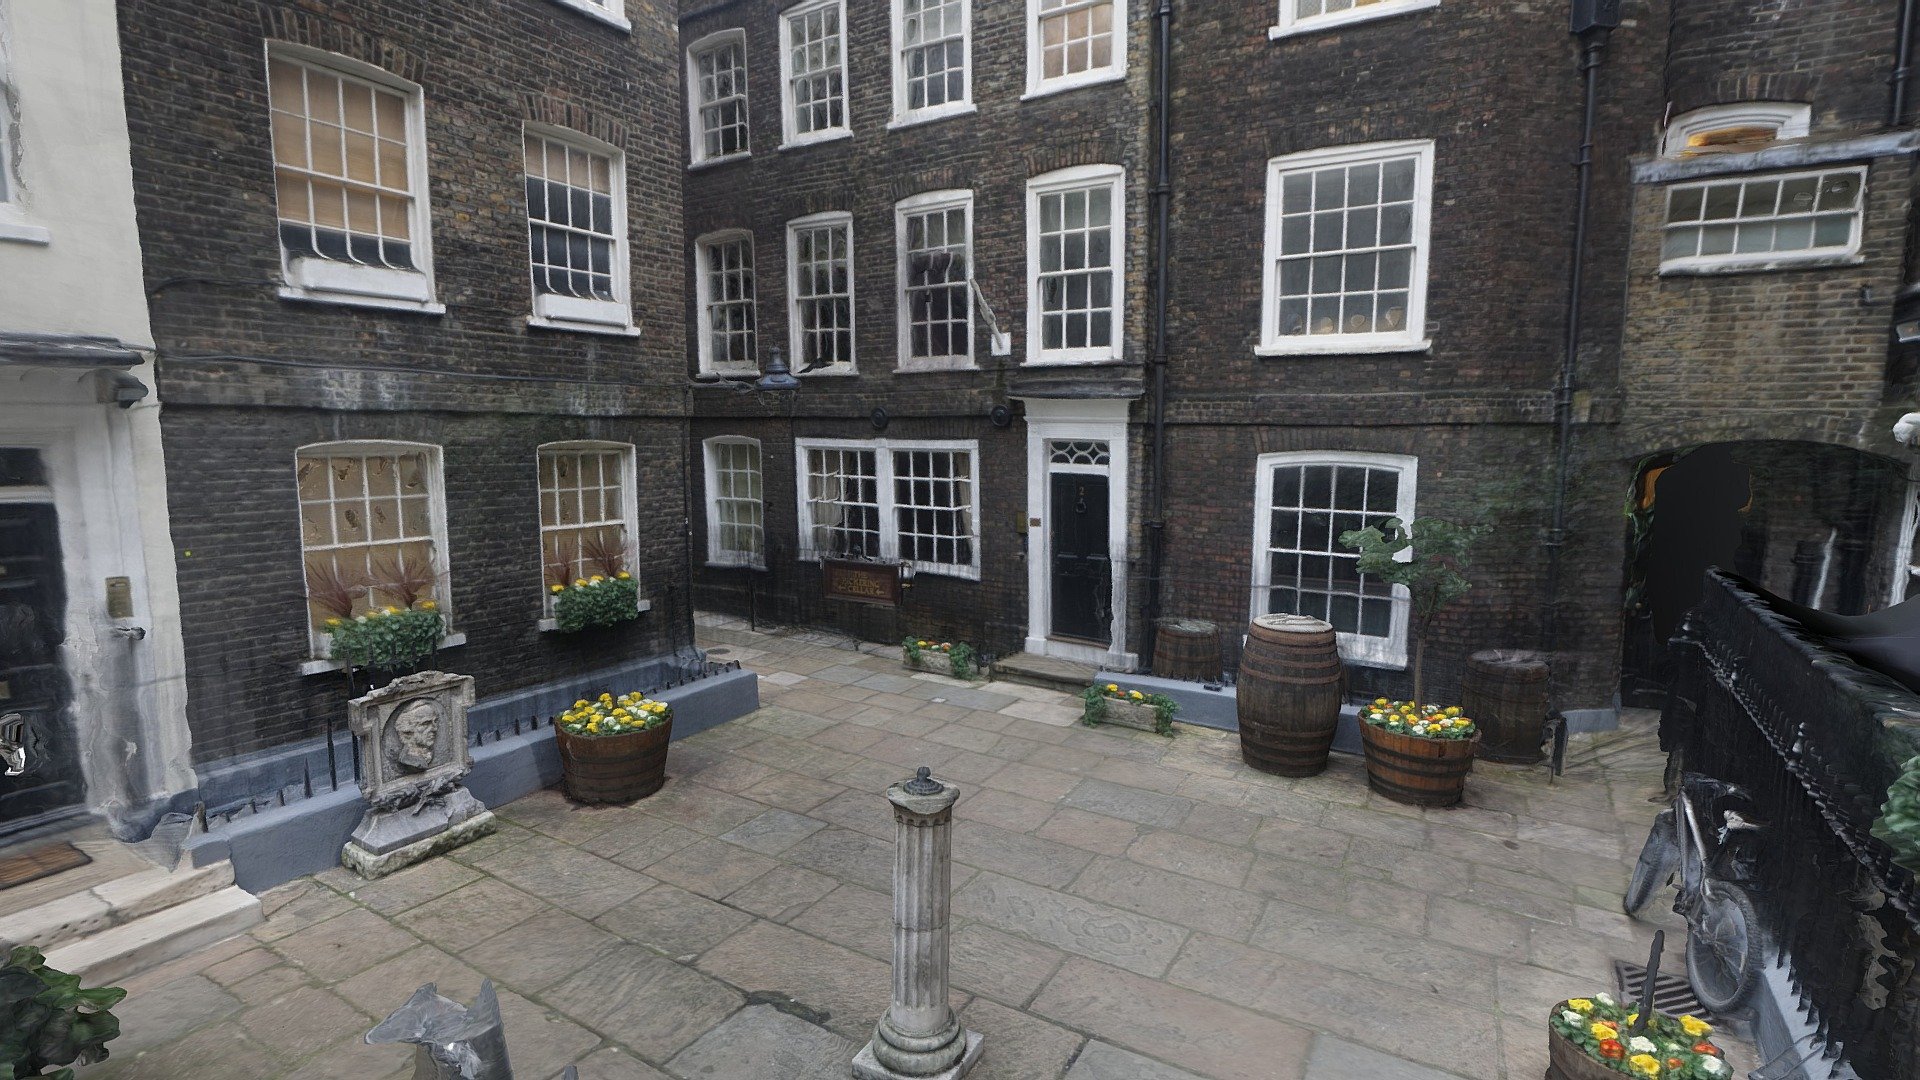 Pickering Place is the smallest square in London. It is located behind Berry Brother's and Rudd wine shop with the entrance off St James's Street through a narrow passageway.

Photos taken in February 2019 with a Sony a6000 and processed in Agisoft Metashape 3d model